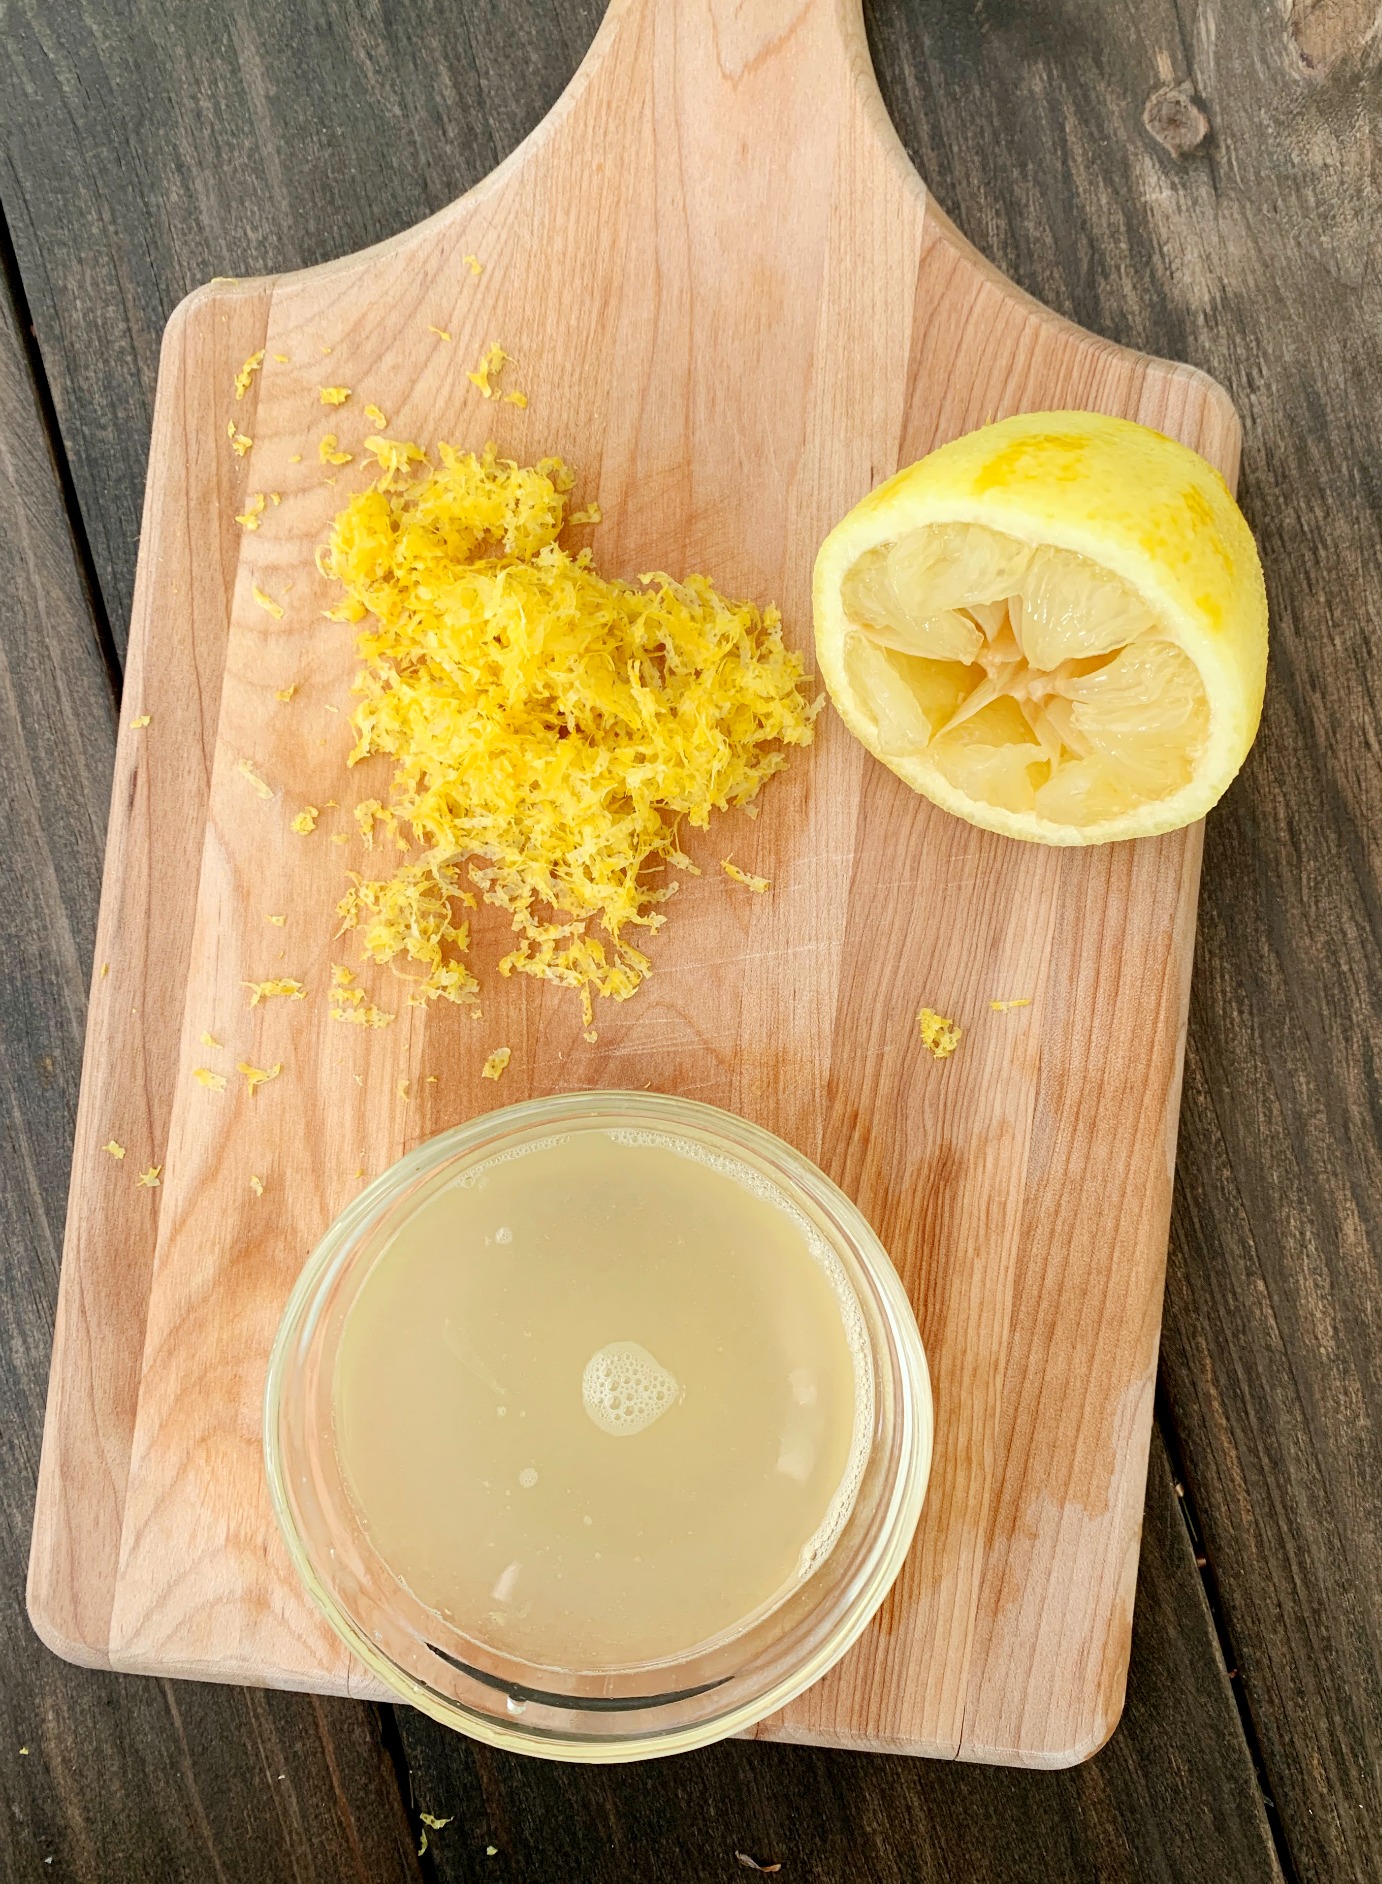 wooden cutting board with a bowl of lemon juice, a pile of lemon zest and a half a lemon that's been juiced